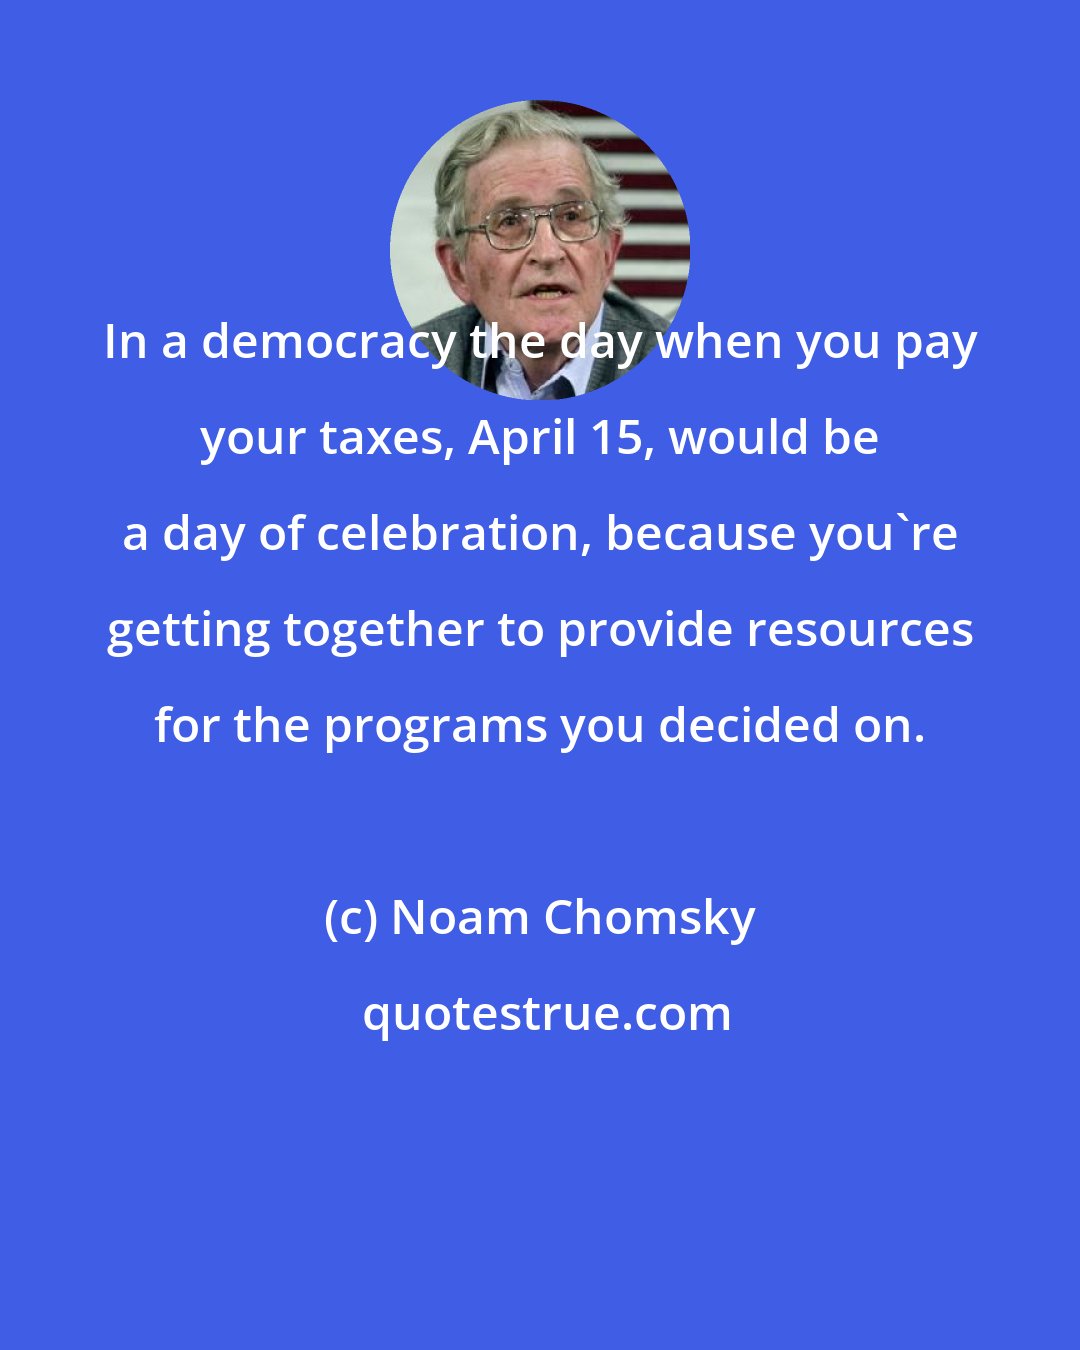 Noam Chomsky: In a democracy the day when you pay your taxes, April 15, would be a day of celebration, because you're getting together to provide resources for the programs you decided on.